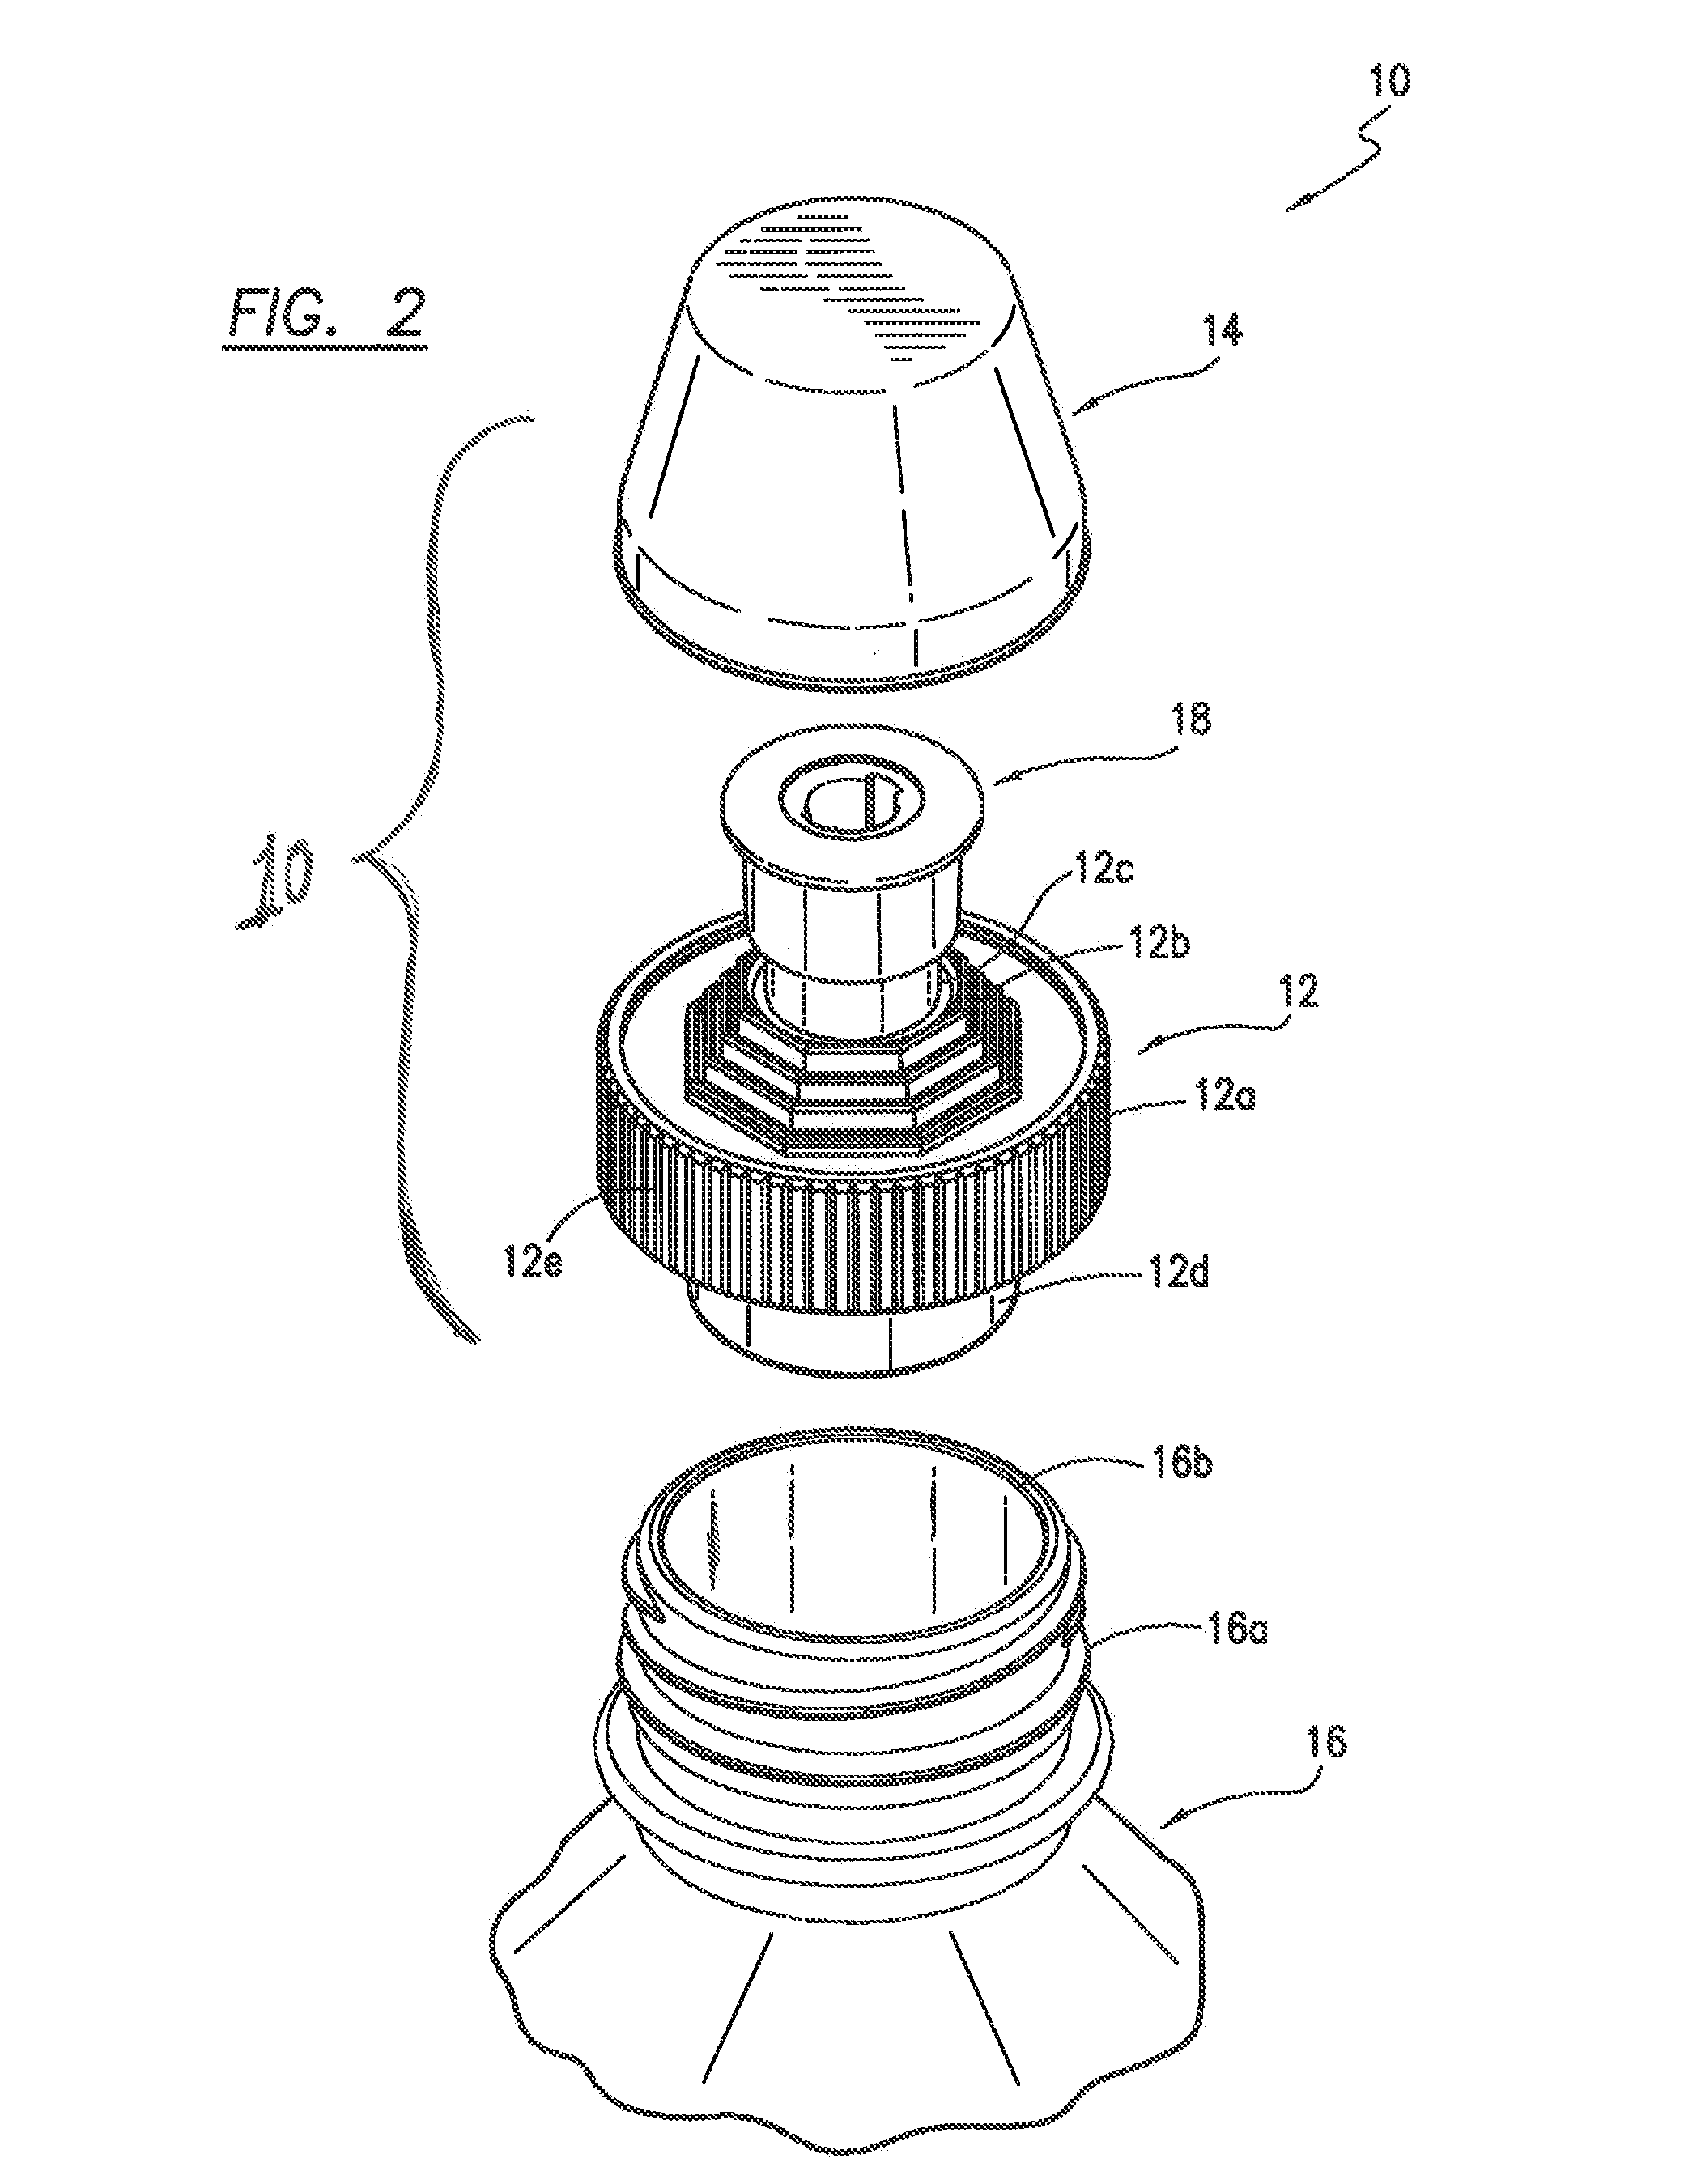 Ingredient dispensing cap for mixing beverages with push-pull drinking spout